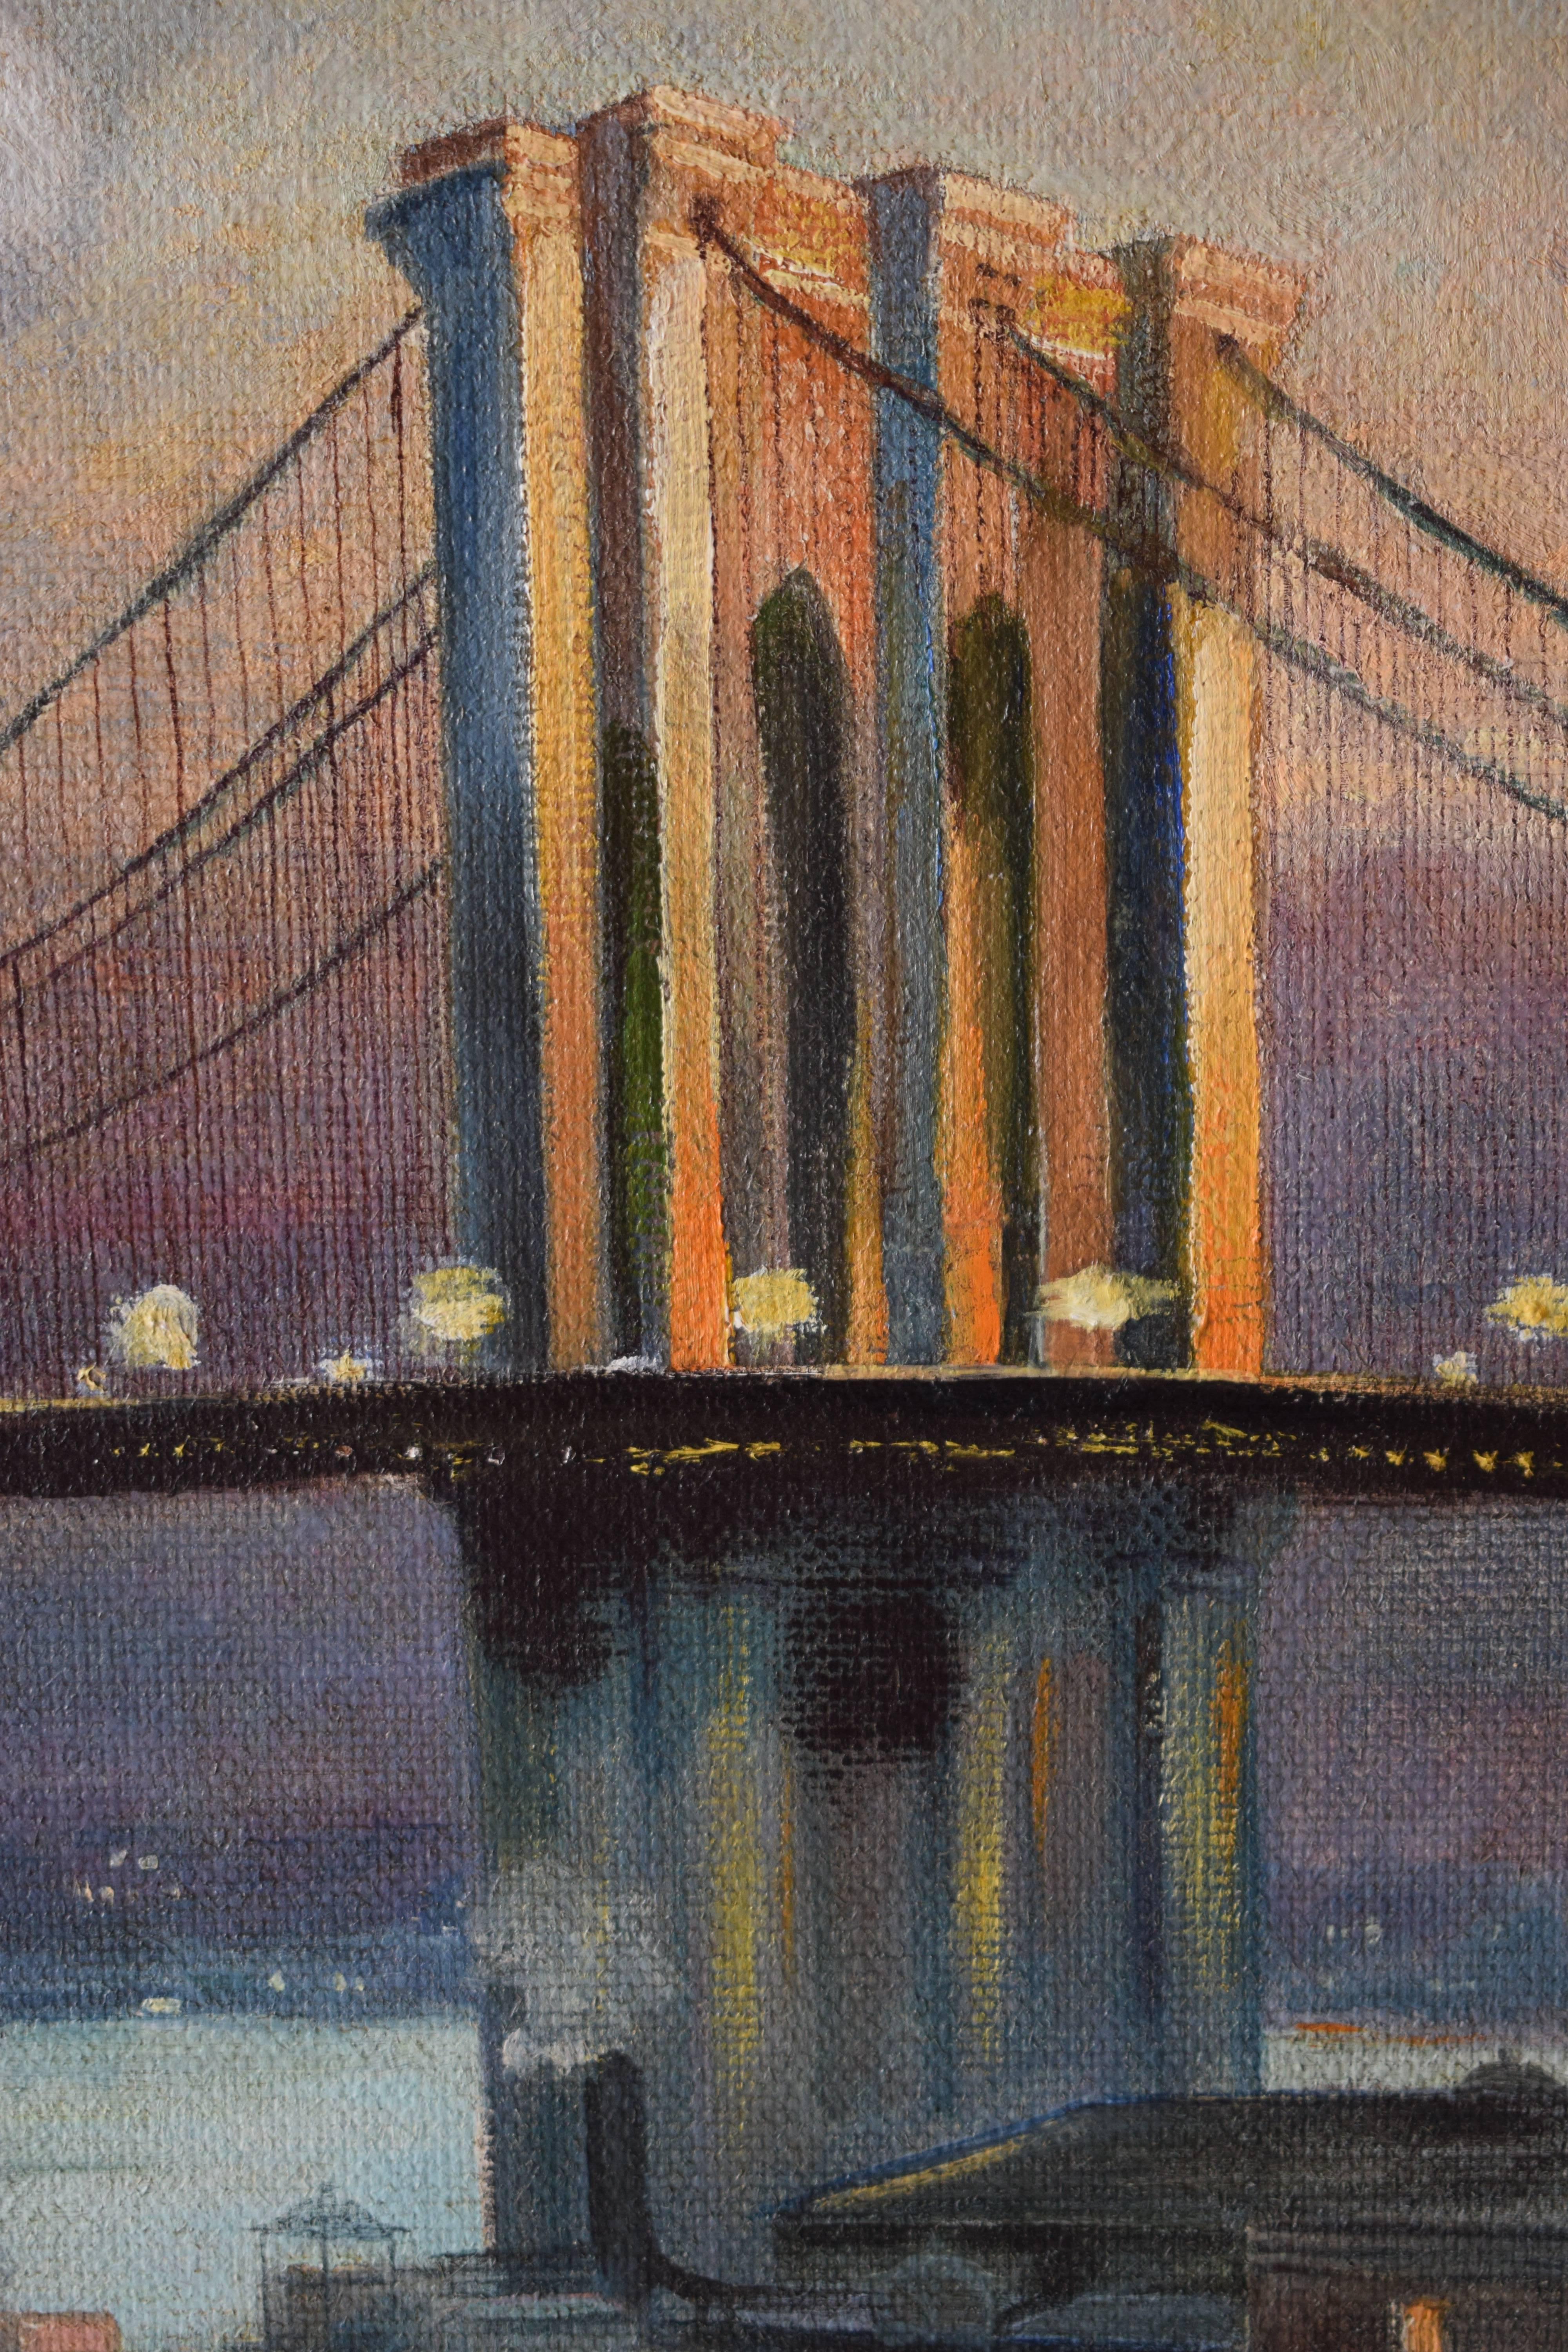 Composition with Brooklyn Bridge New York, oil on canvas, unknown artist.
Signed: O. Barrild 1913
The painting is Framed look last photo